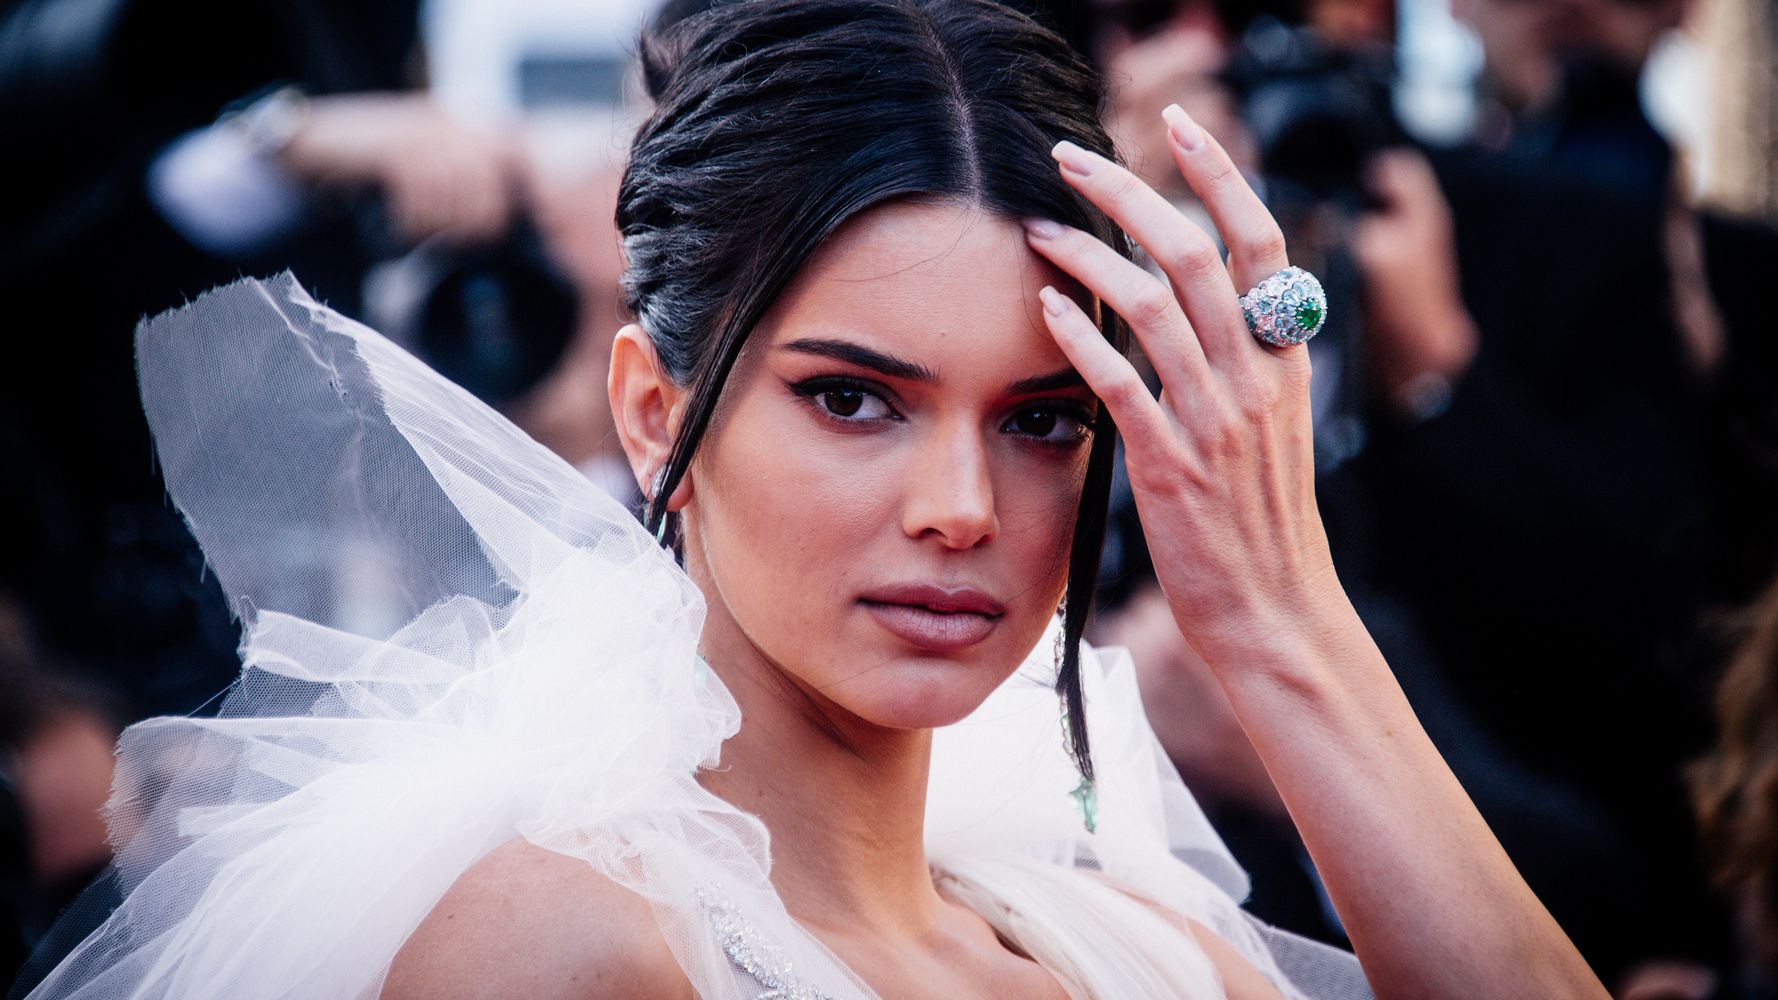 Kendall Jenner Just Enraged a Whole Bunch of Models